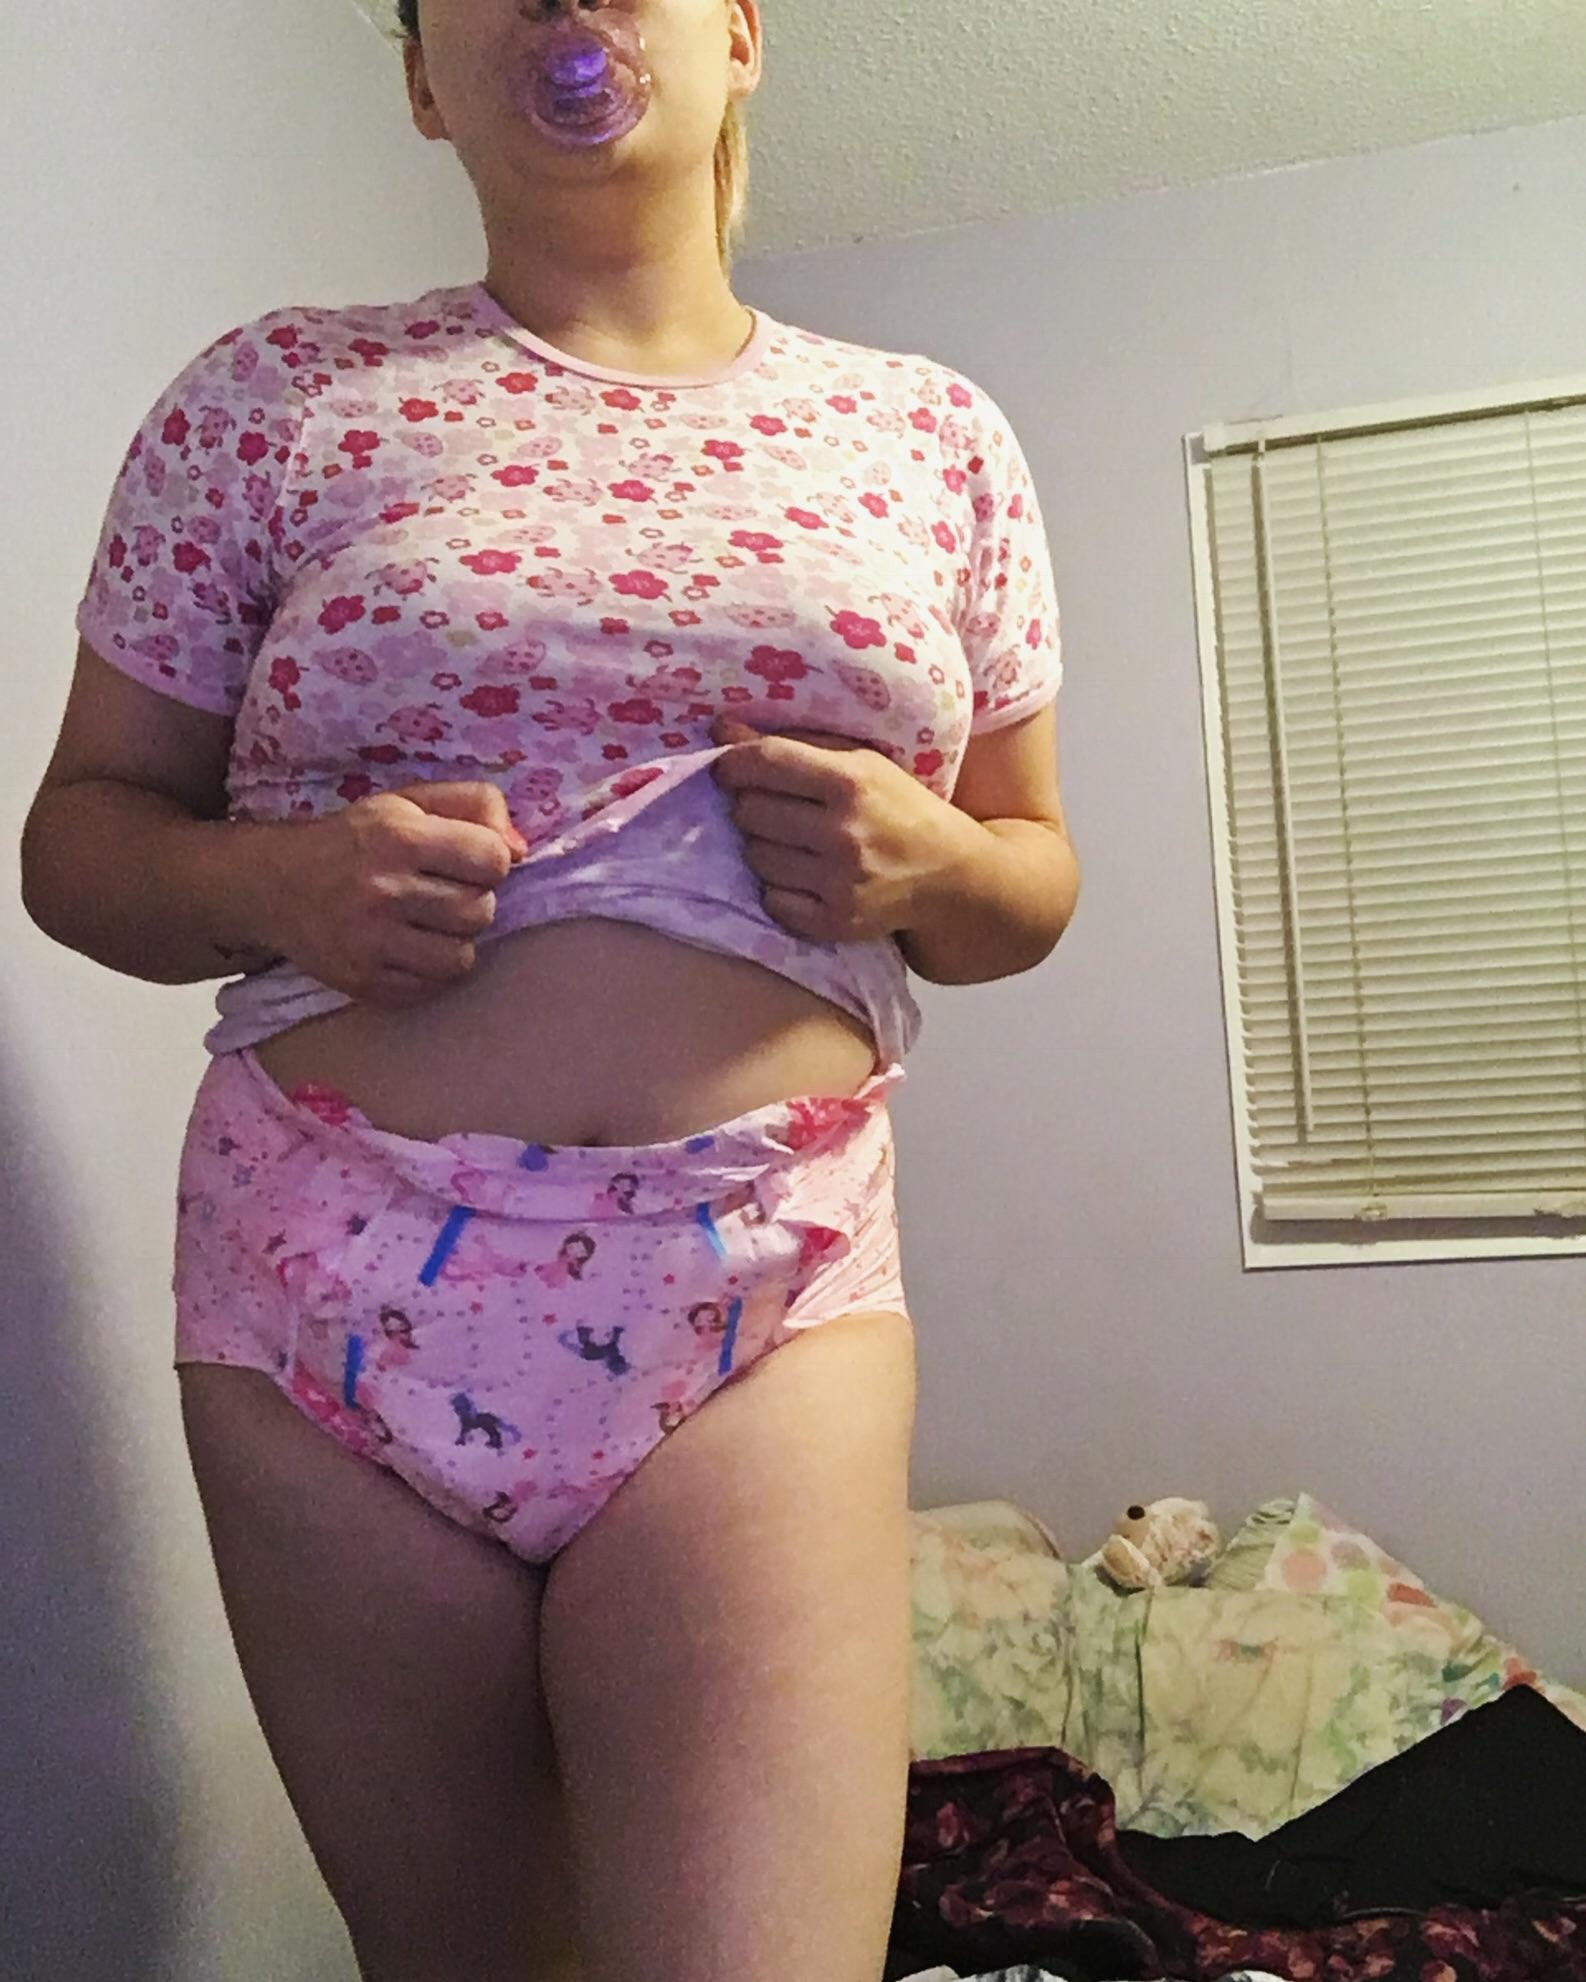 How cute is the Rearz princess diaper?! Ps don’t they suit me so well? Hehe